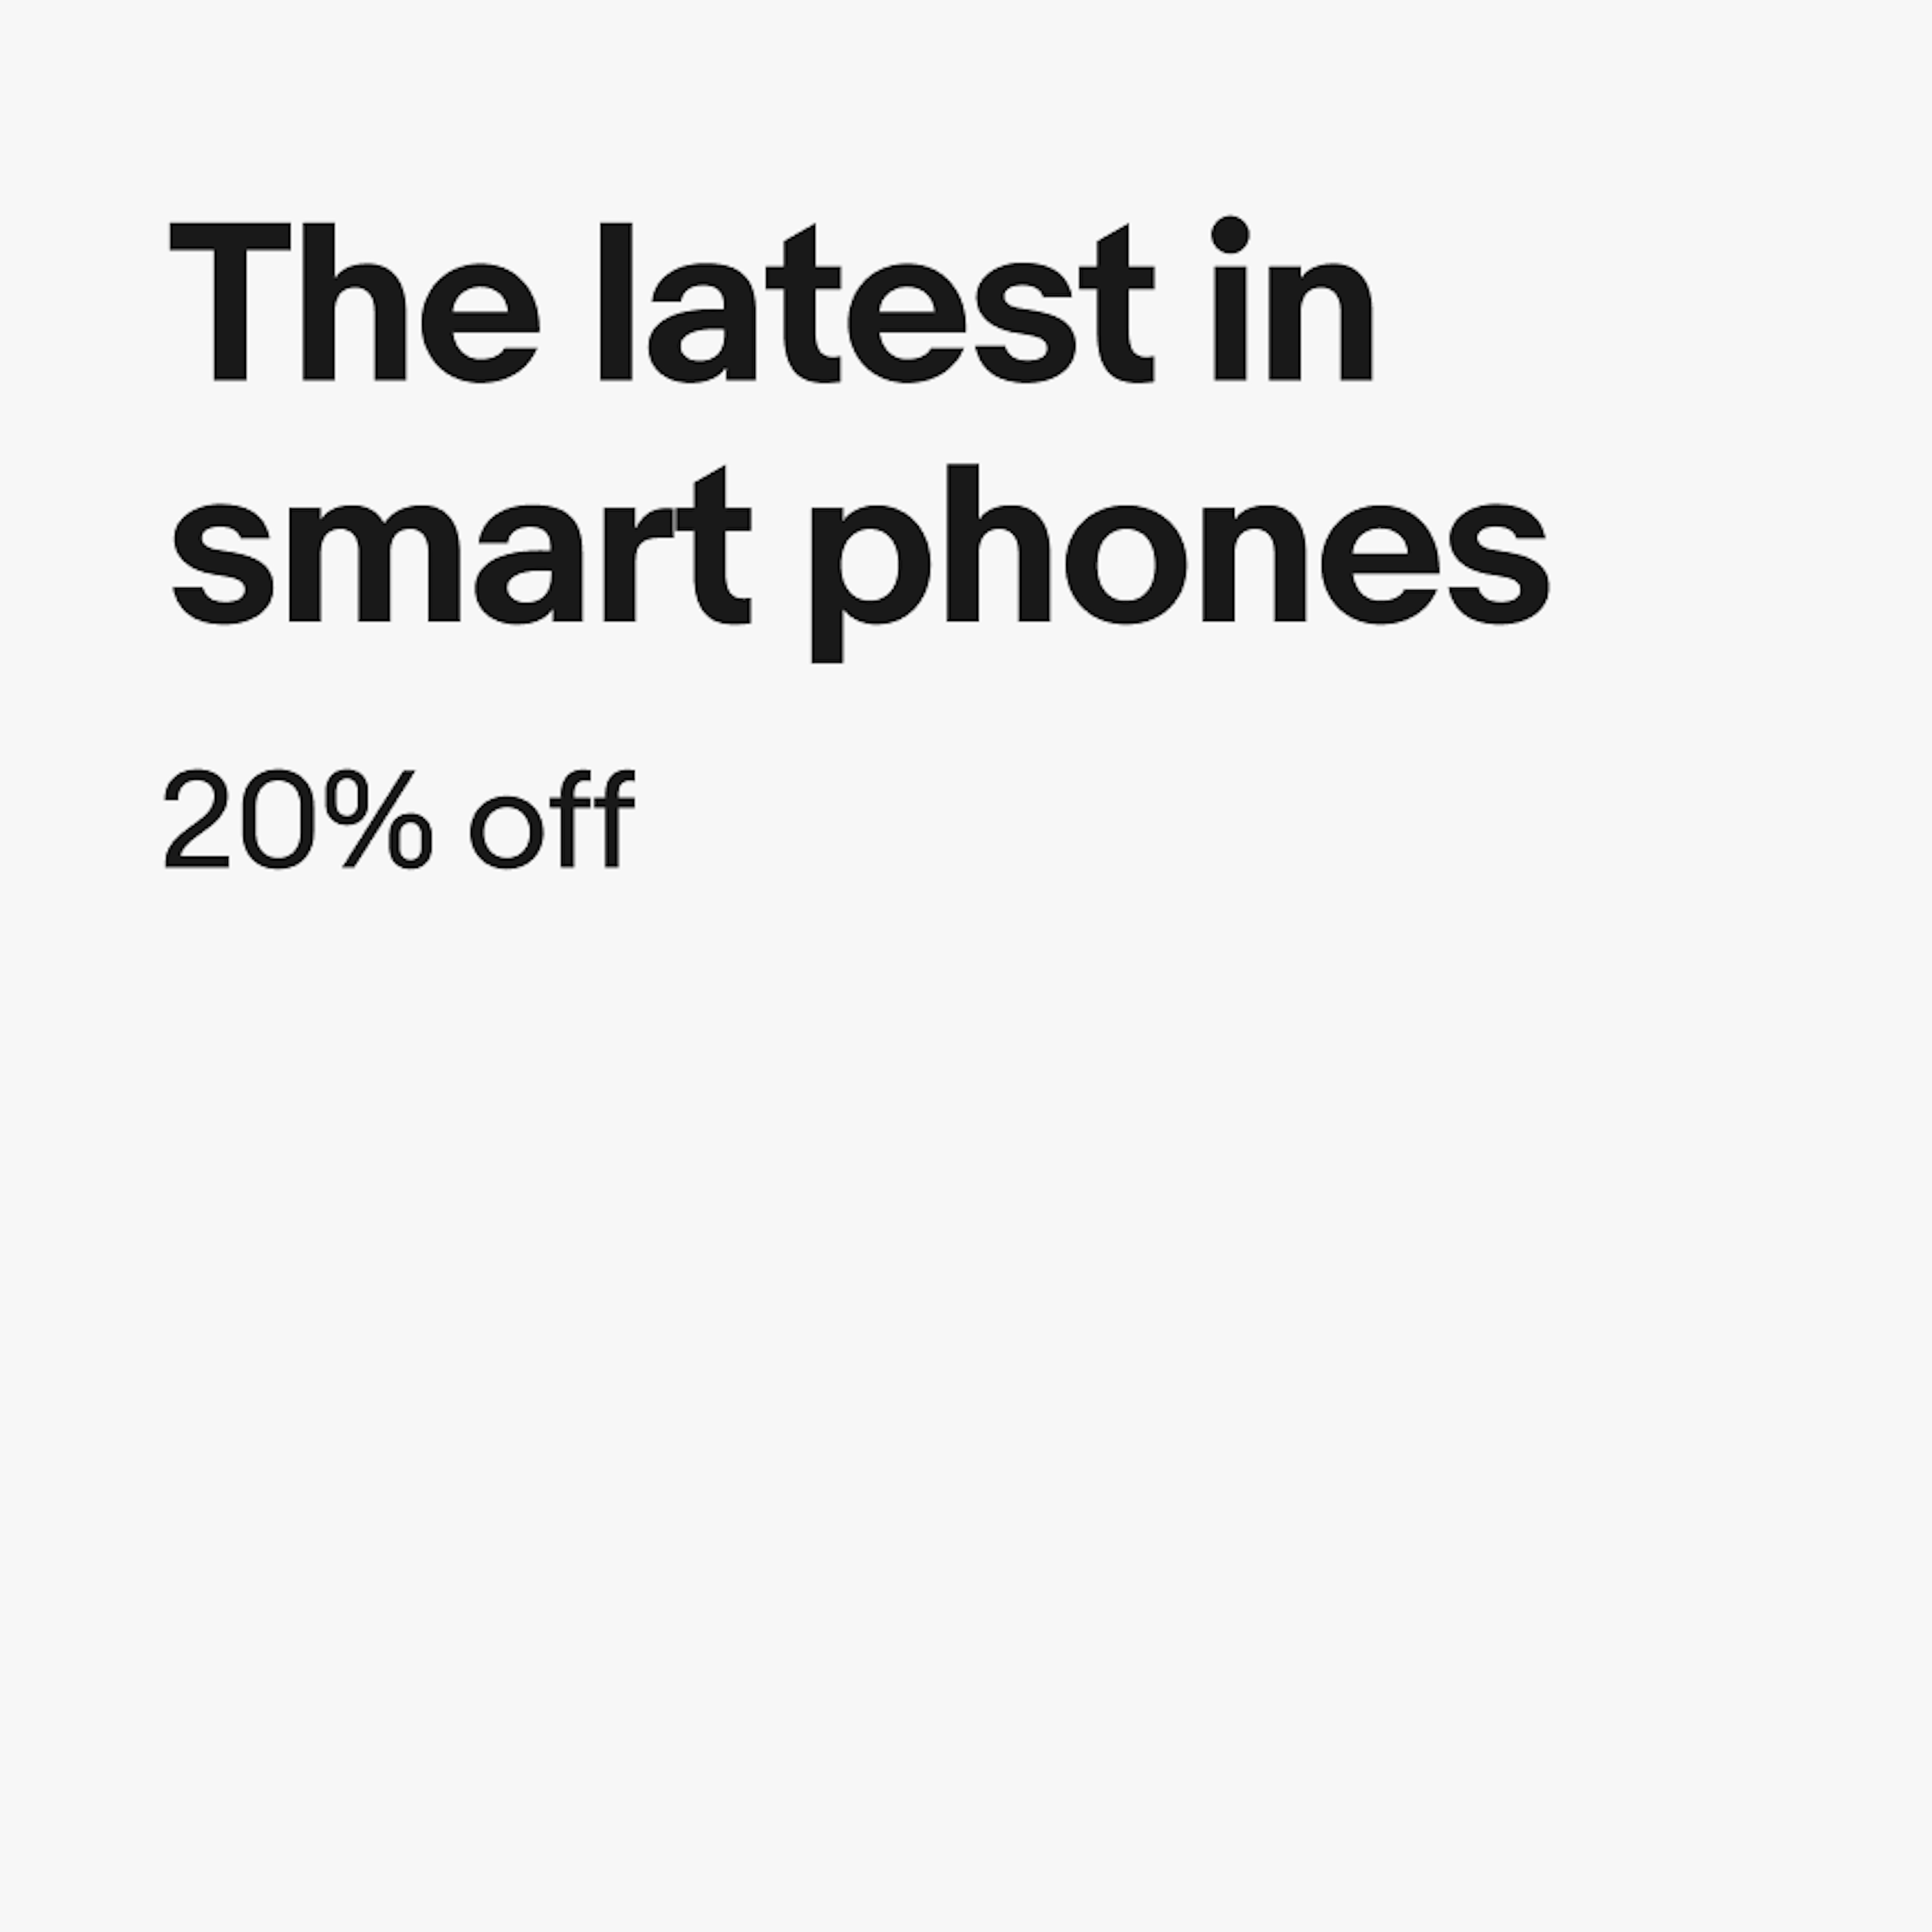 A type-based ad for smart phones. The headline is in bold weight, while the subtitle is in regular weight.